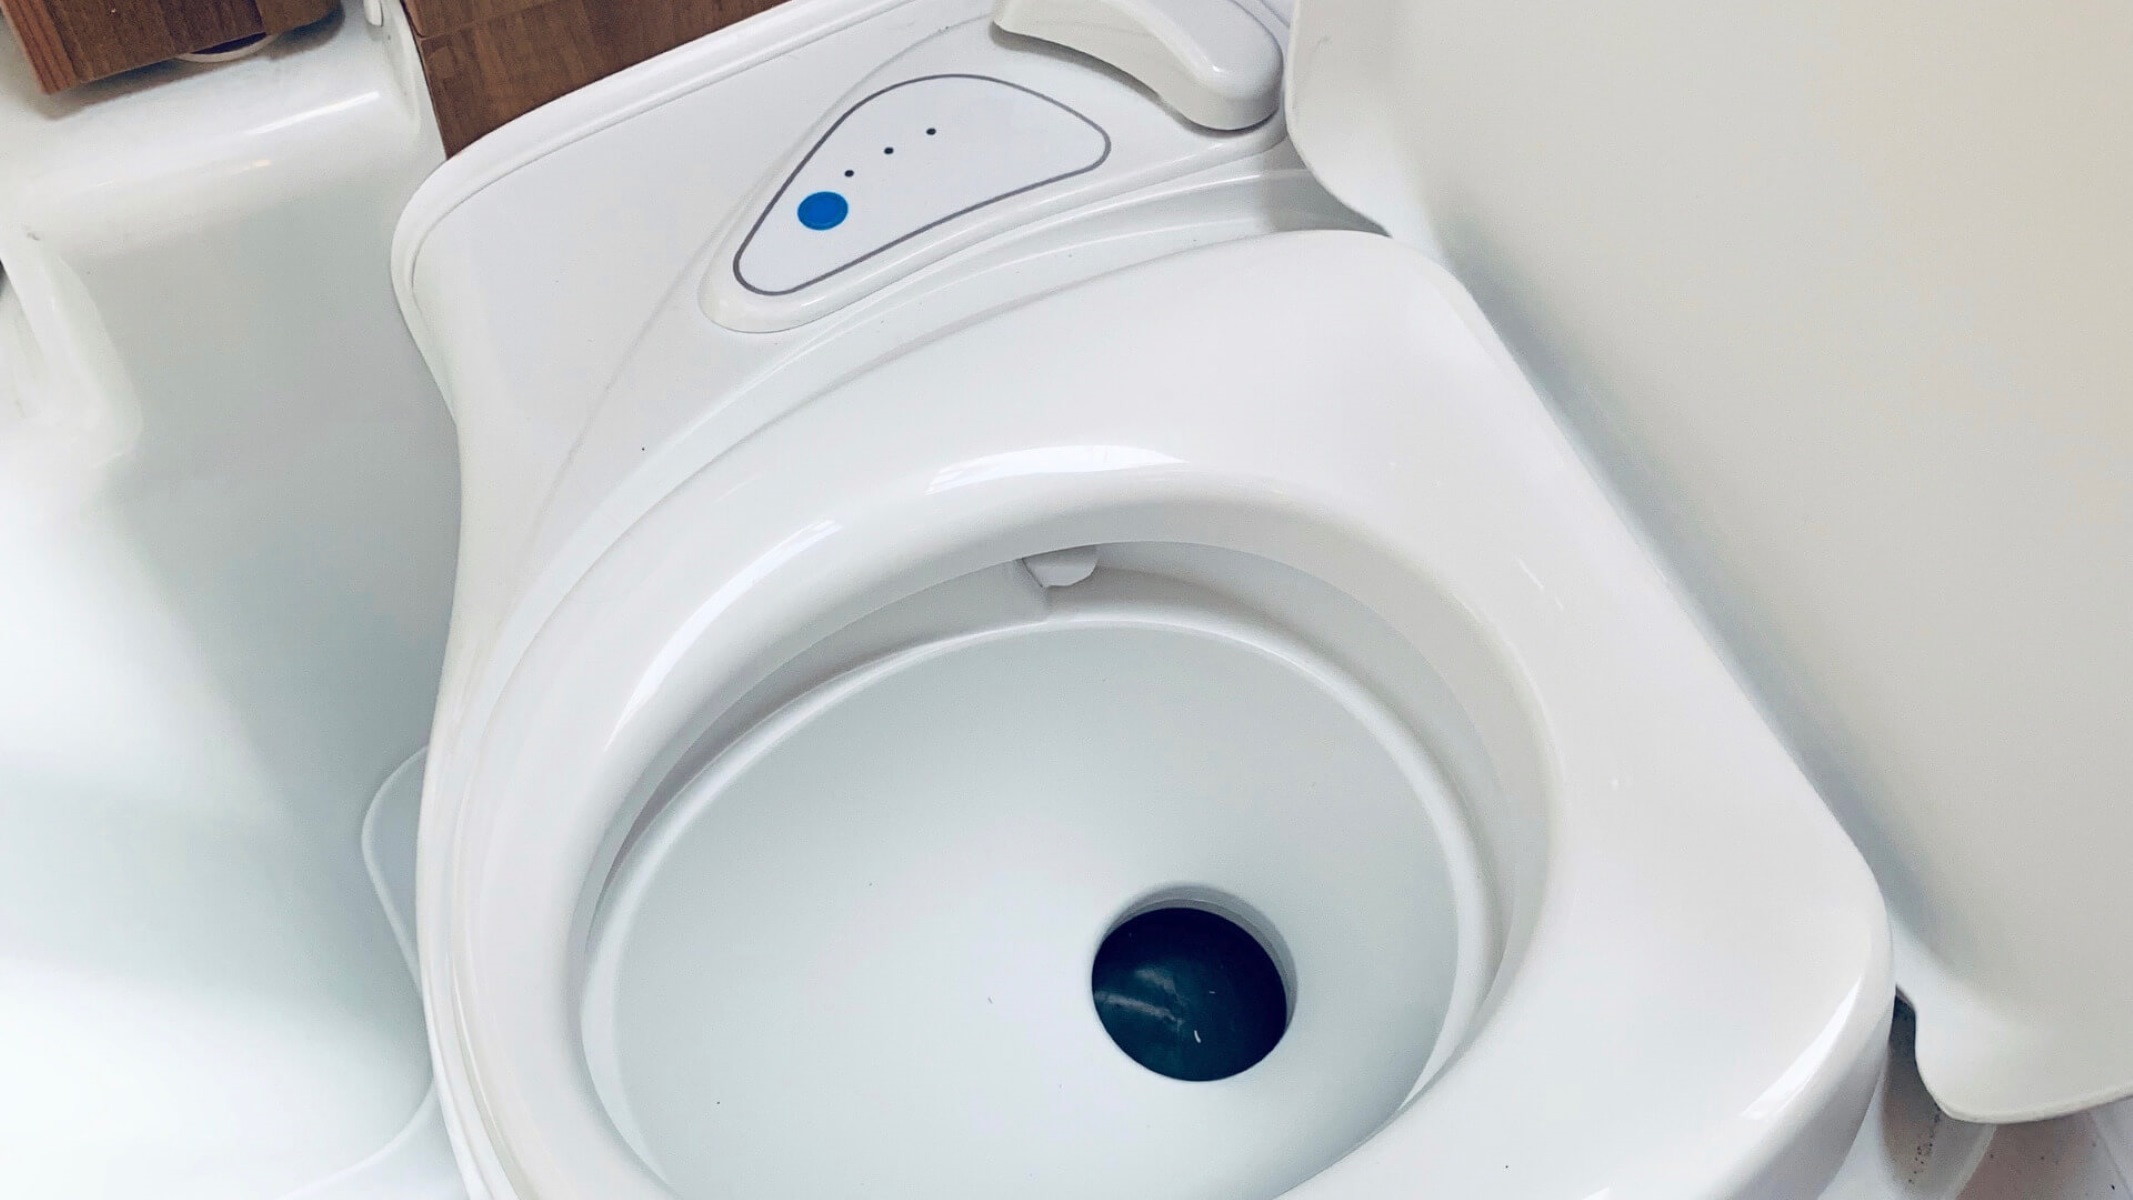 How To Use Automatic Toilet Bowl Cleaner